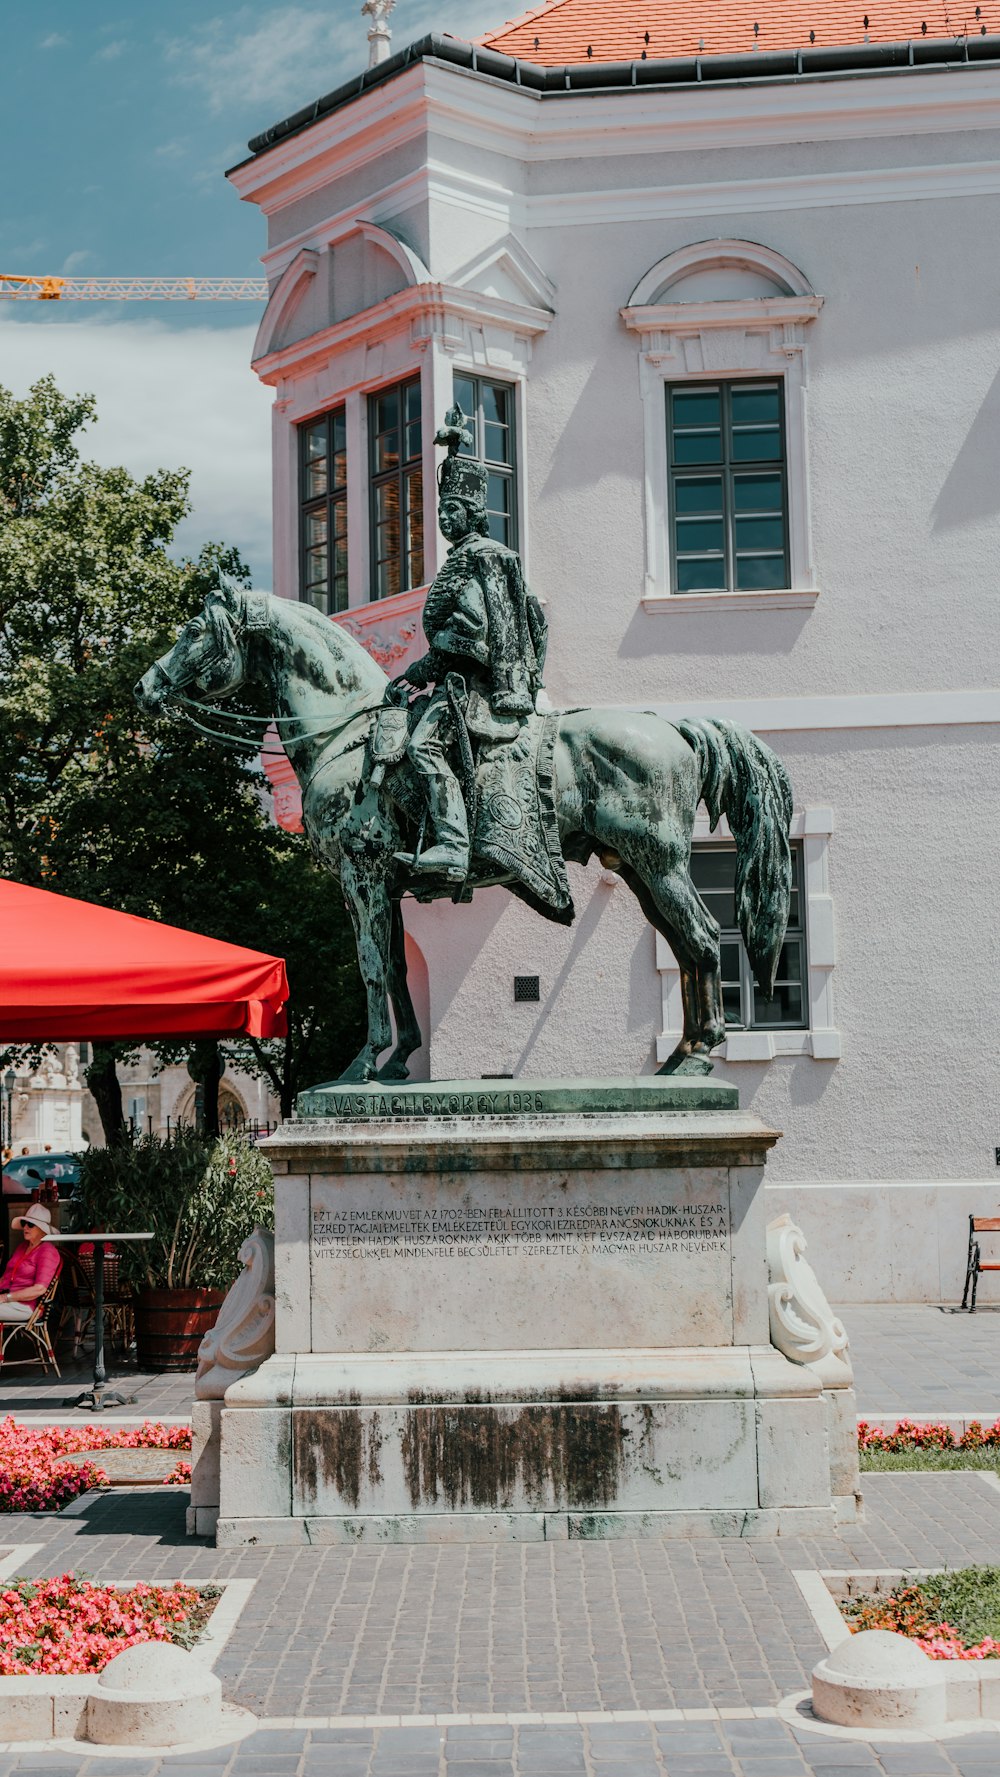 A statue of a person riding a horse photo – Free Hungary Image on Unsplash